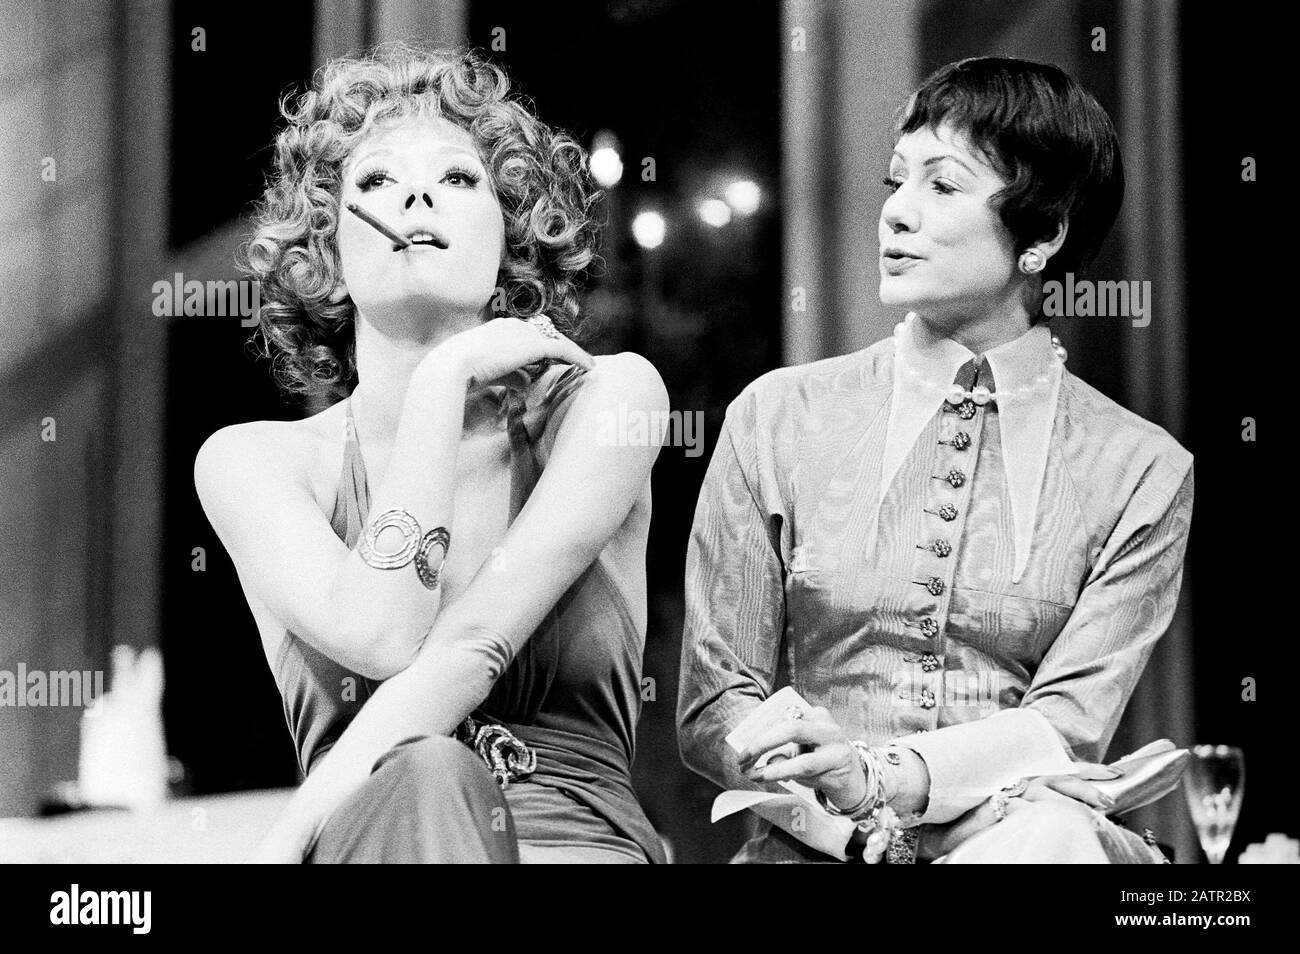 Diana Rigg (Celimene), Gillian Barge (Arsinoe) in THE MISANTHROPE by Moliere directed by John Dexter at the National Theatre (NT), the Old Vic, London in 1973. Dame Enid Diana Elizabeth Rigg, born Doncaster 1938. English stage, film and television actress. Made a CBE in 1988 and a DBE in 1994. Stock Photo